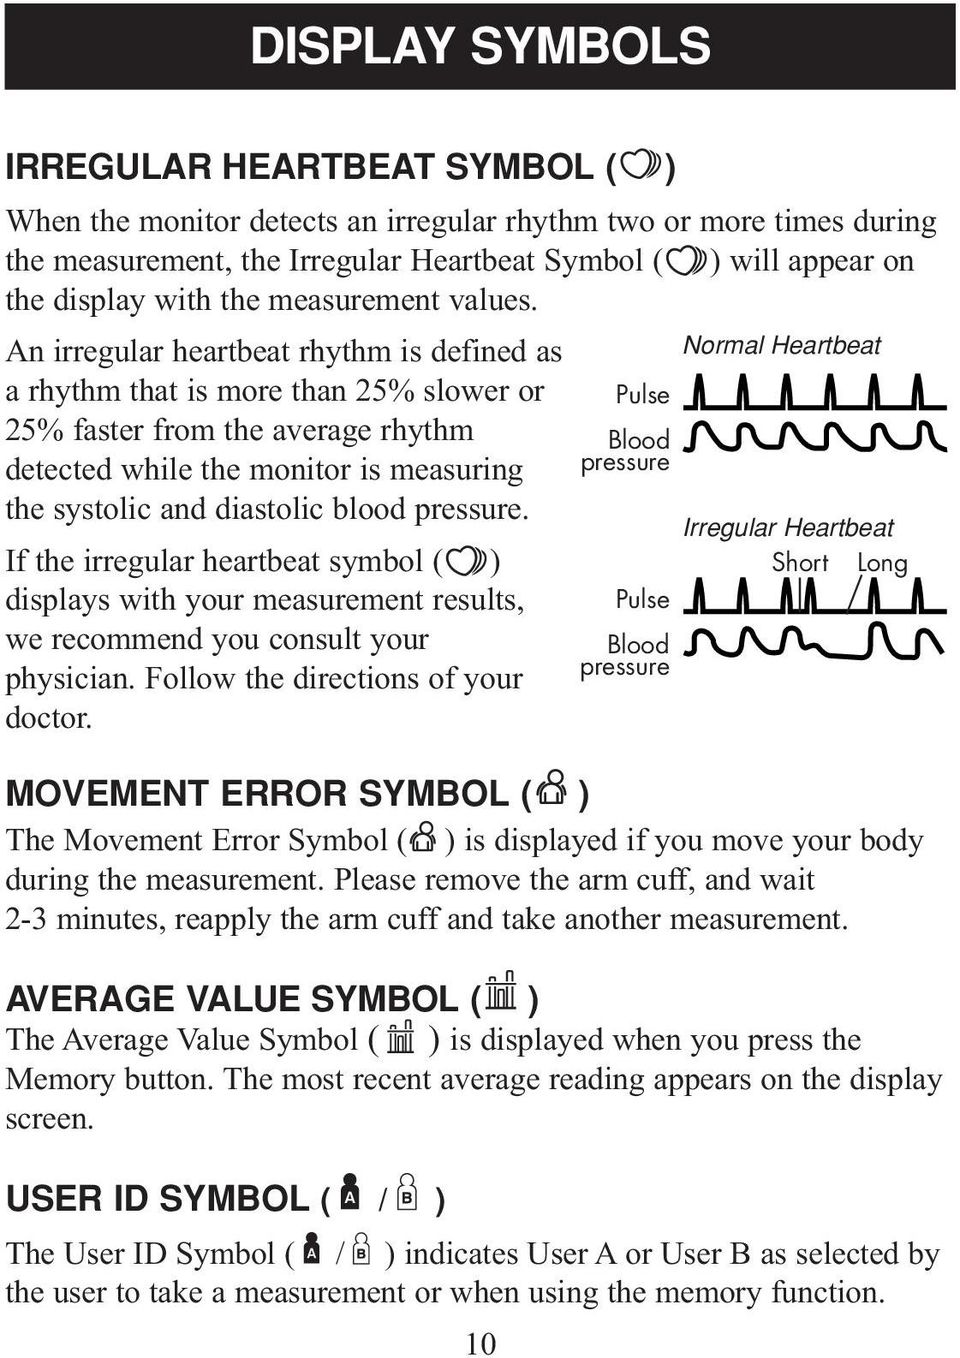 An irregular heartbeat rhythm is defined as a rhythm that is more than 25% slower or 25% faster from the average rhythm detected while the monitor is measuring the systolic and diastolic blood